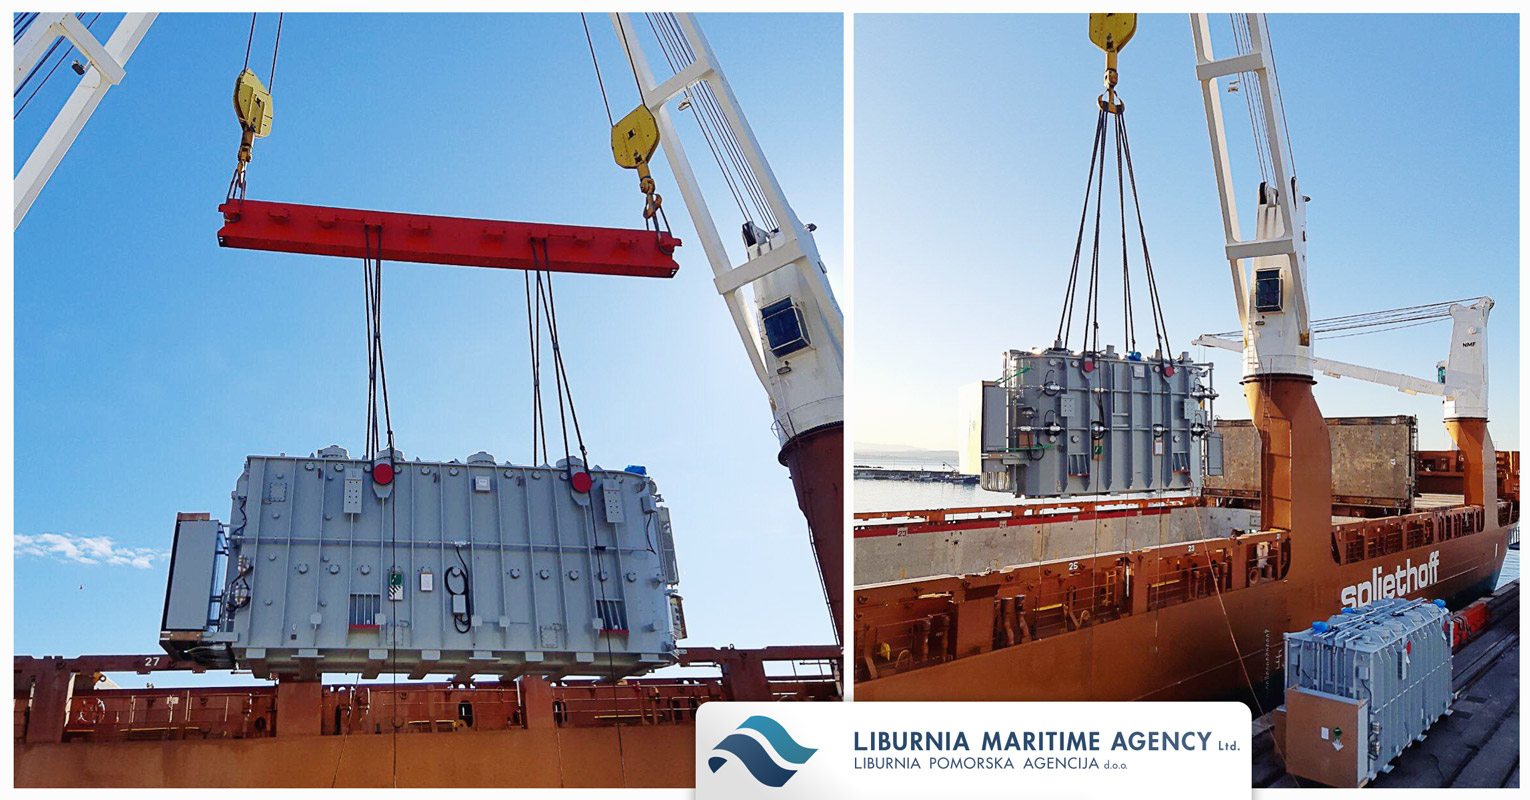 Liburnia Handled the Full Scope for Four Transformers Weighing up to 196mt from Rijeka to Houston